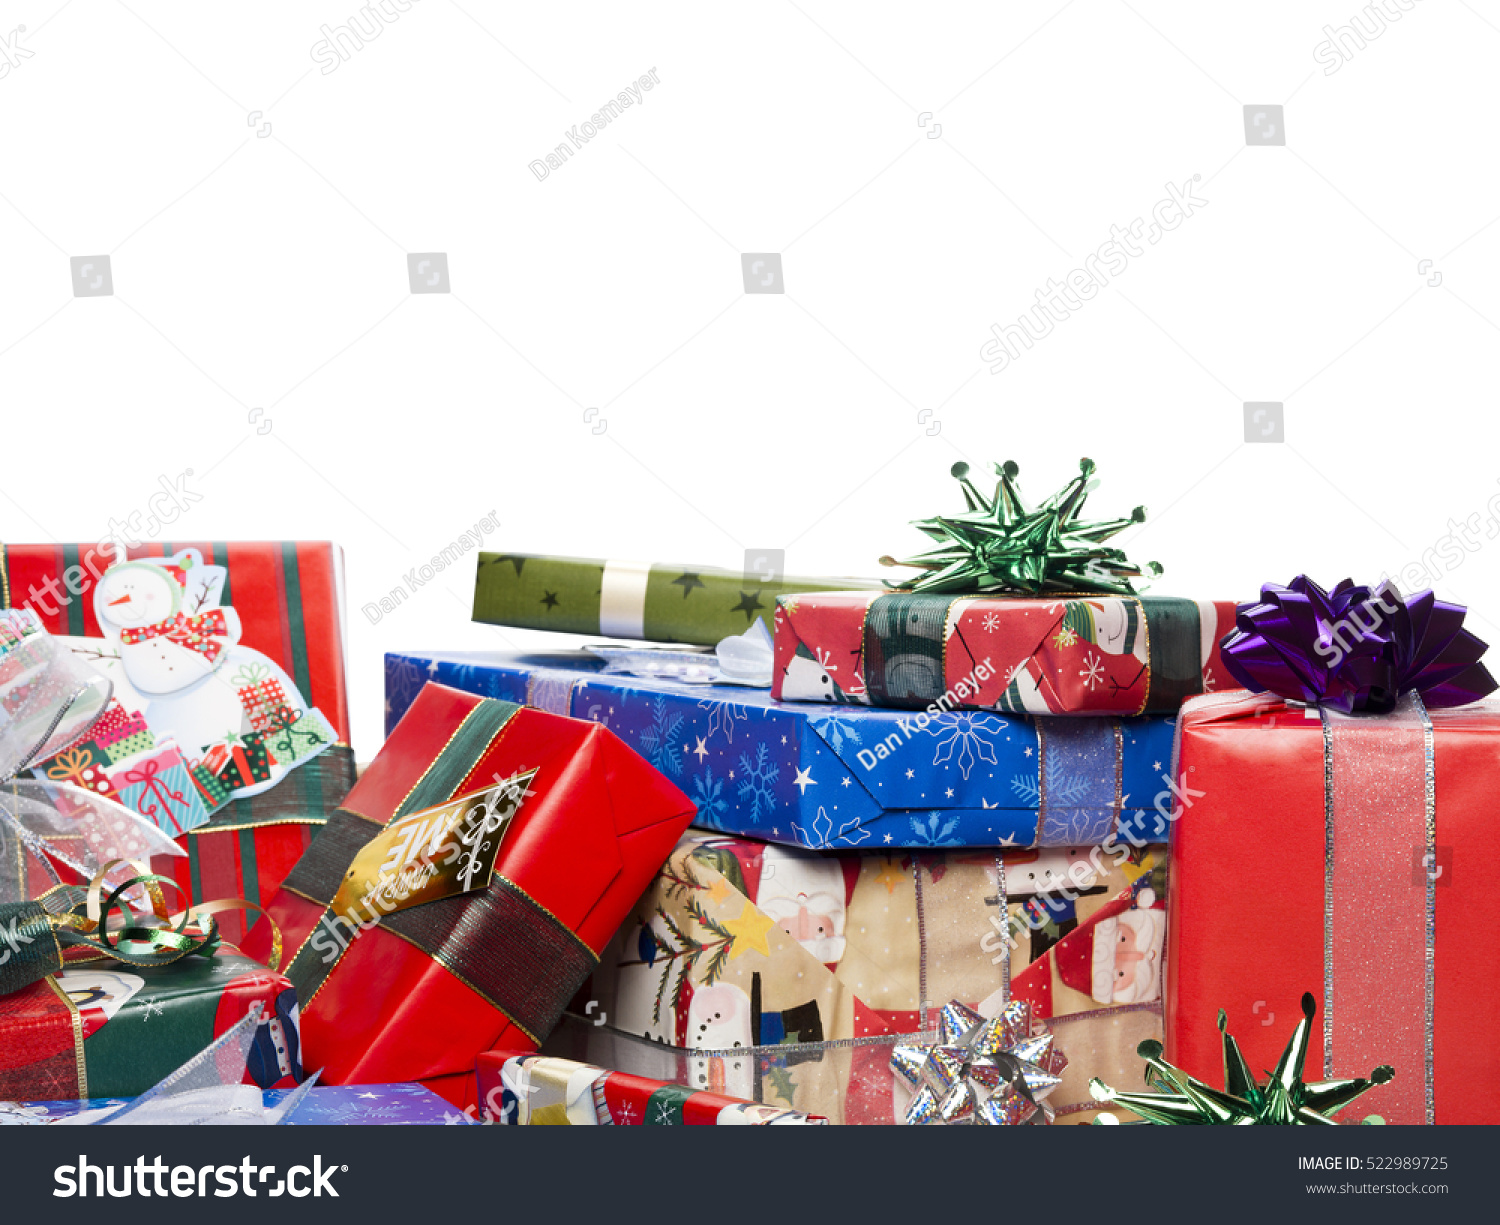 Christmas presents on white background #522989725